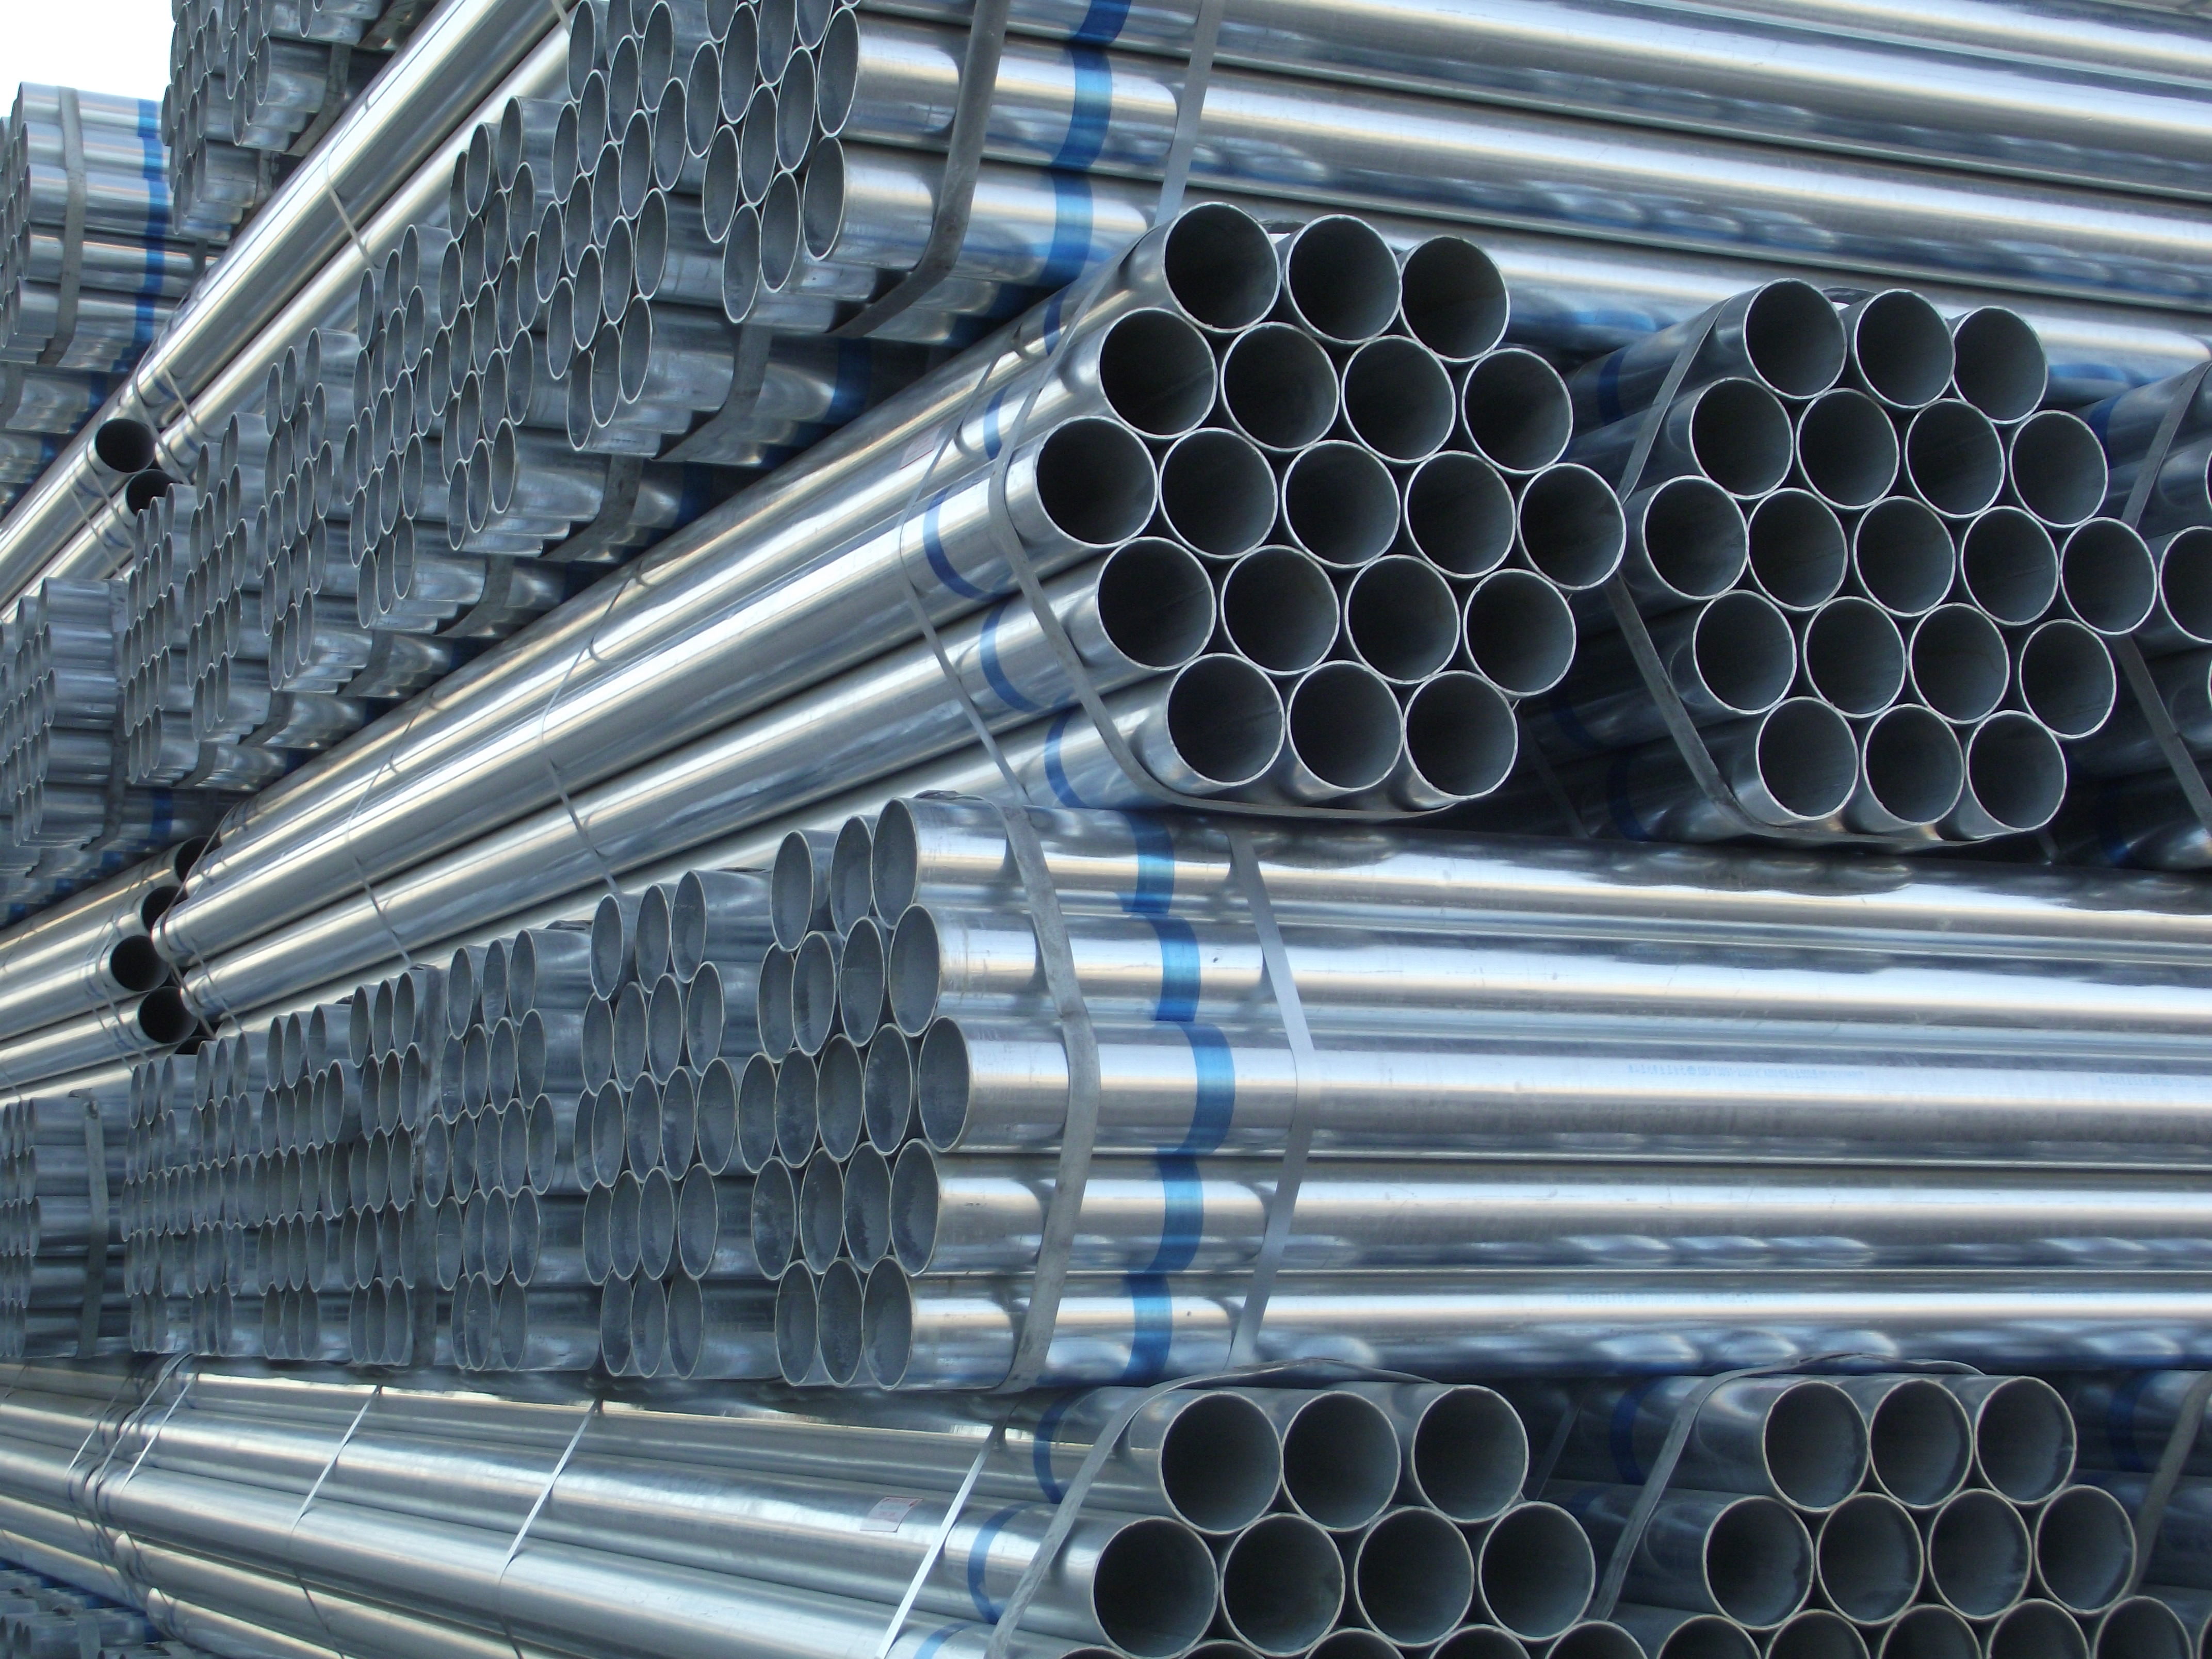 High Performance Astm A36 Square Steel Pipe - DIN 2440 Steel Pipe made in China by Tianjin Youfa Steel Pipe Group – Youfa